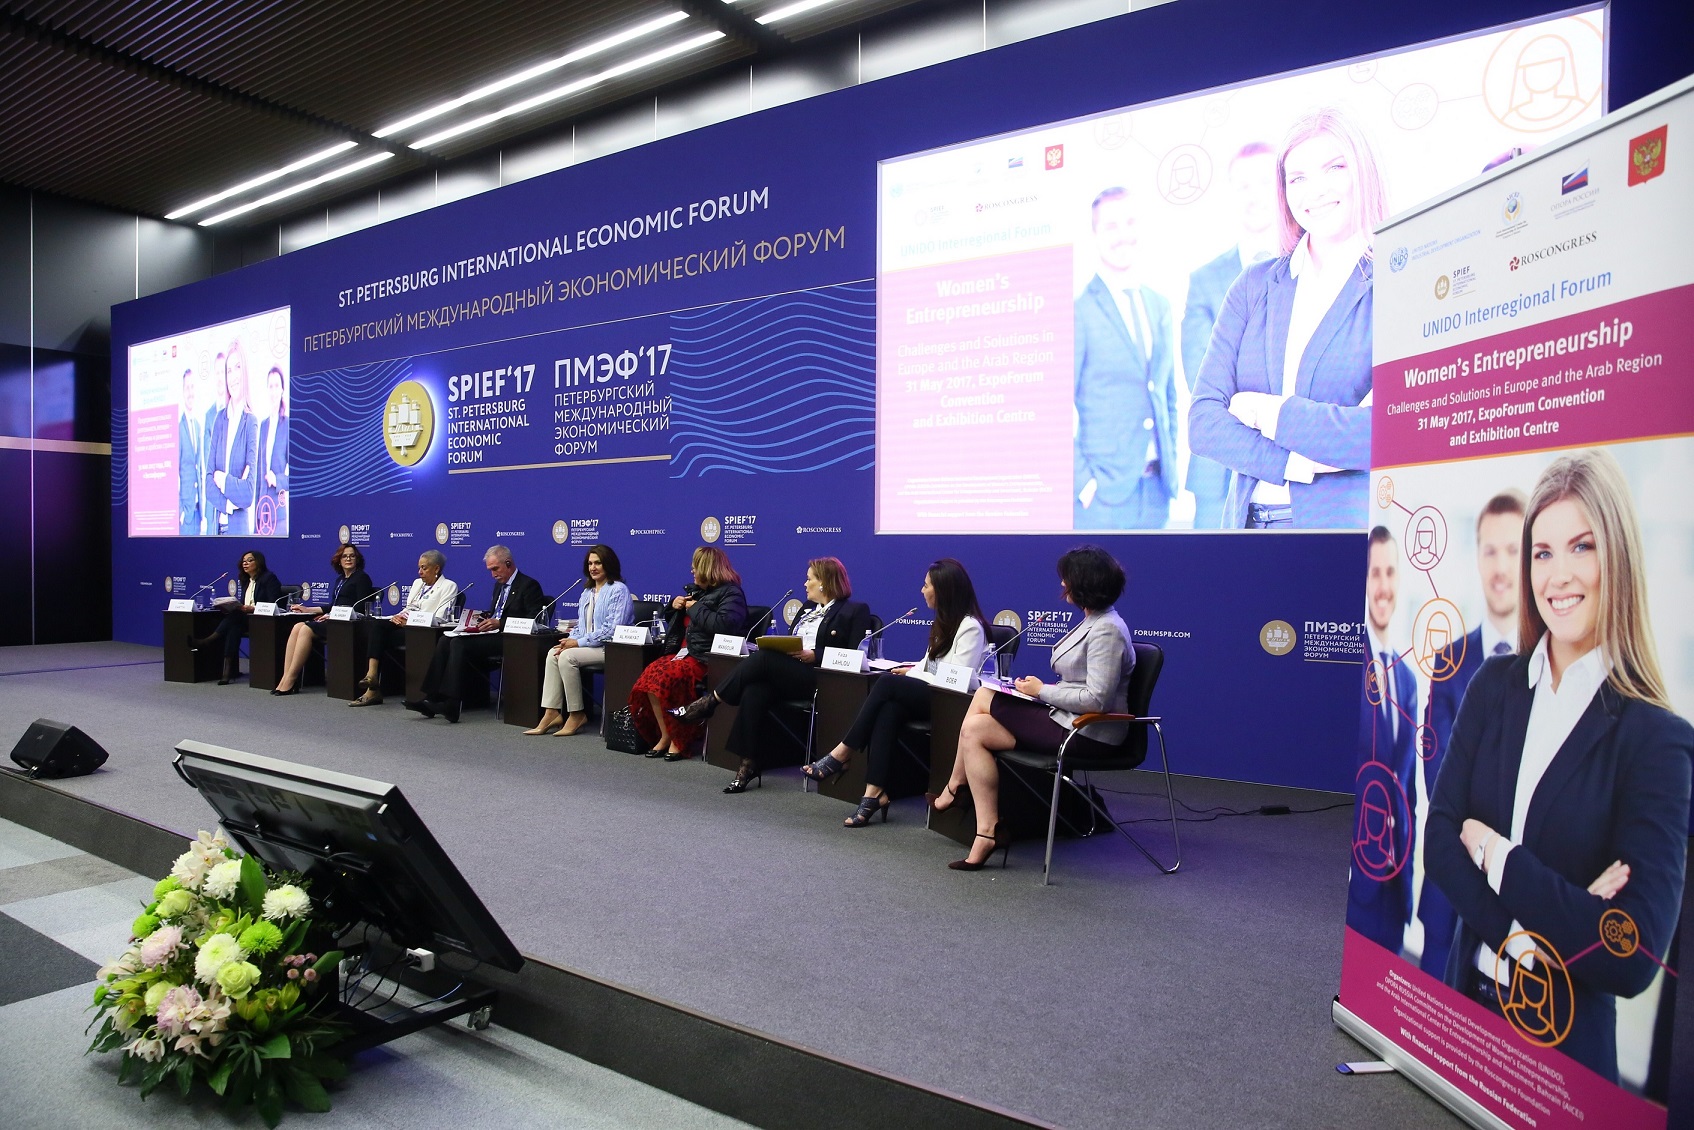 International Forum “Increasing the contribution of women to economic growth and prosperity: Creating an enabling environment” under UNIDO to be held at SPIEF 2018